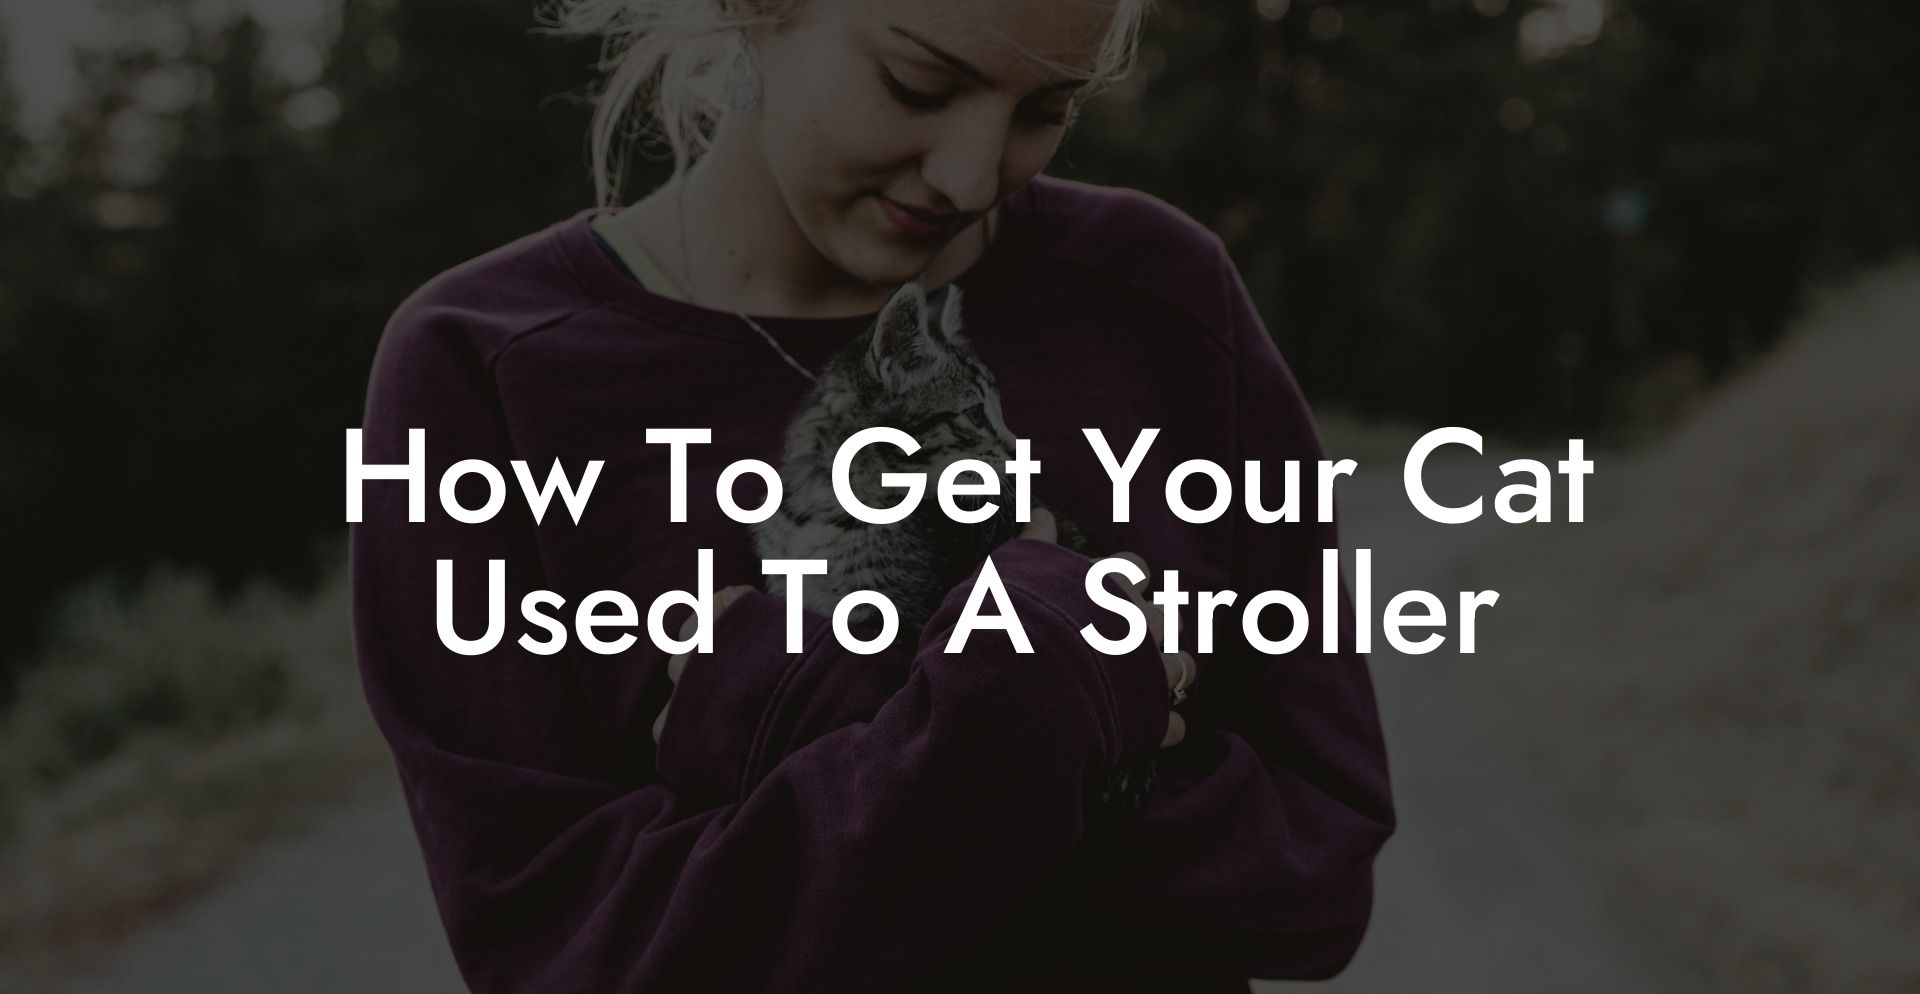 How To Get Your Cat Used To A Stroller